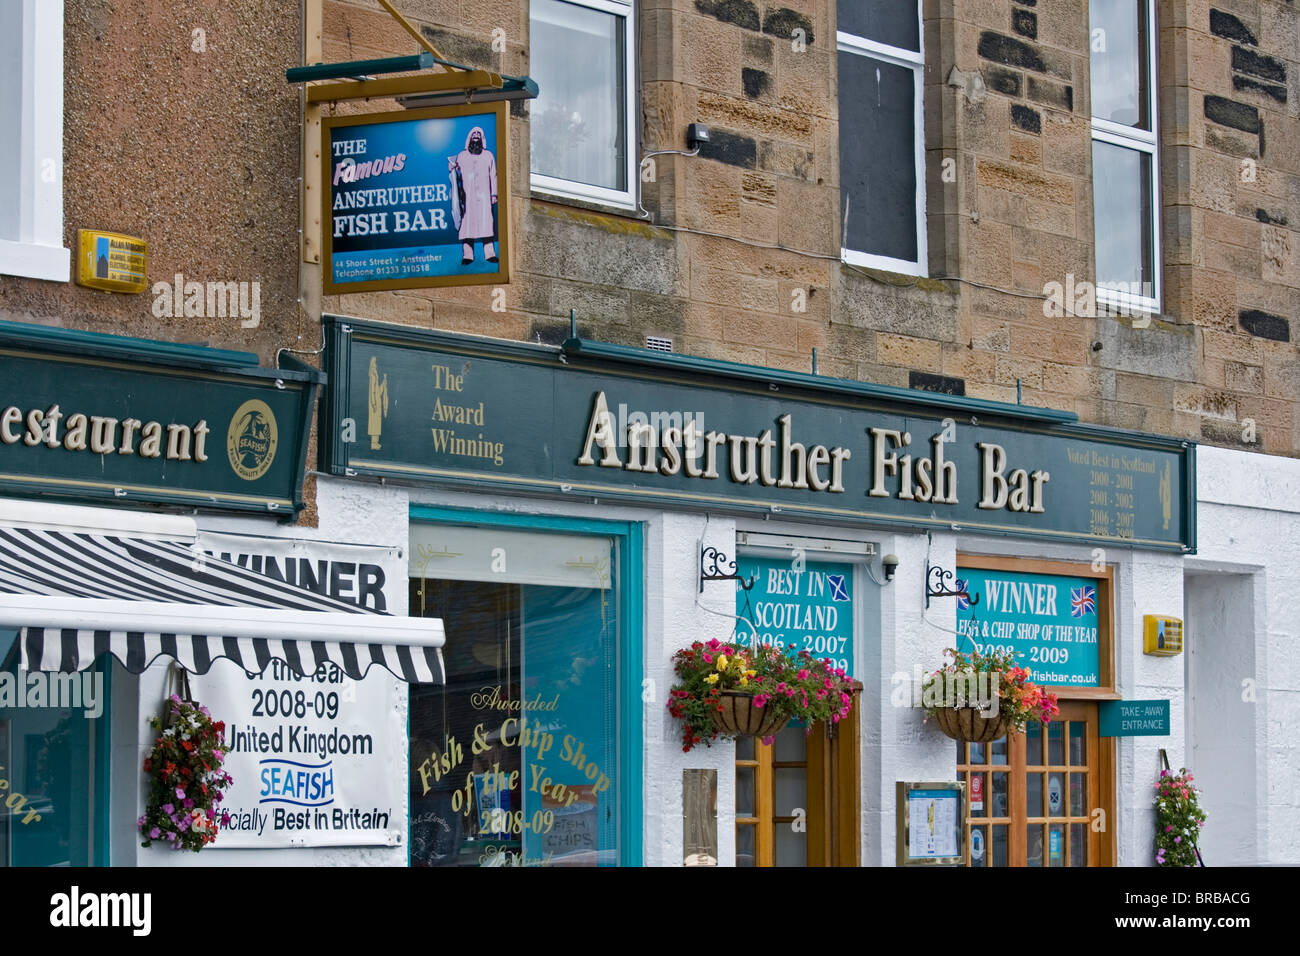 Award winning fish and chip shop in Anstruther, Fife, Scotland UK Stock Photo